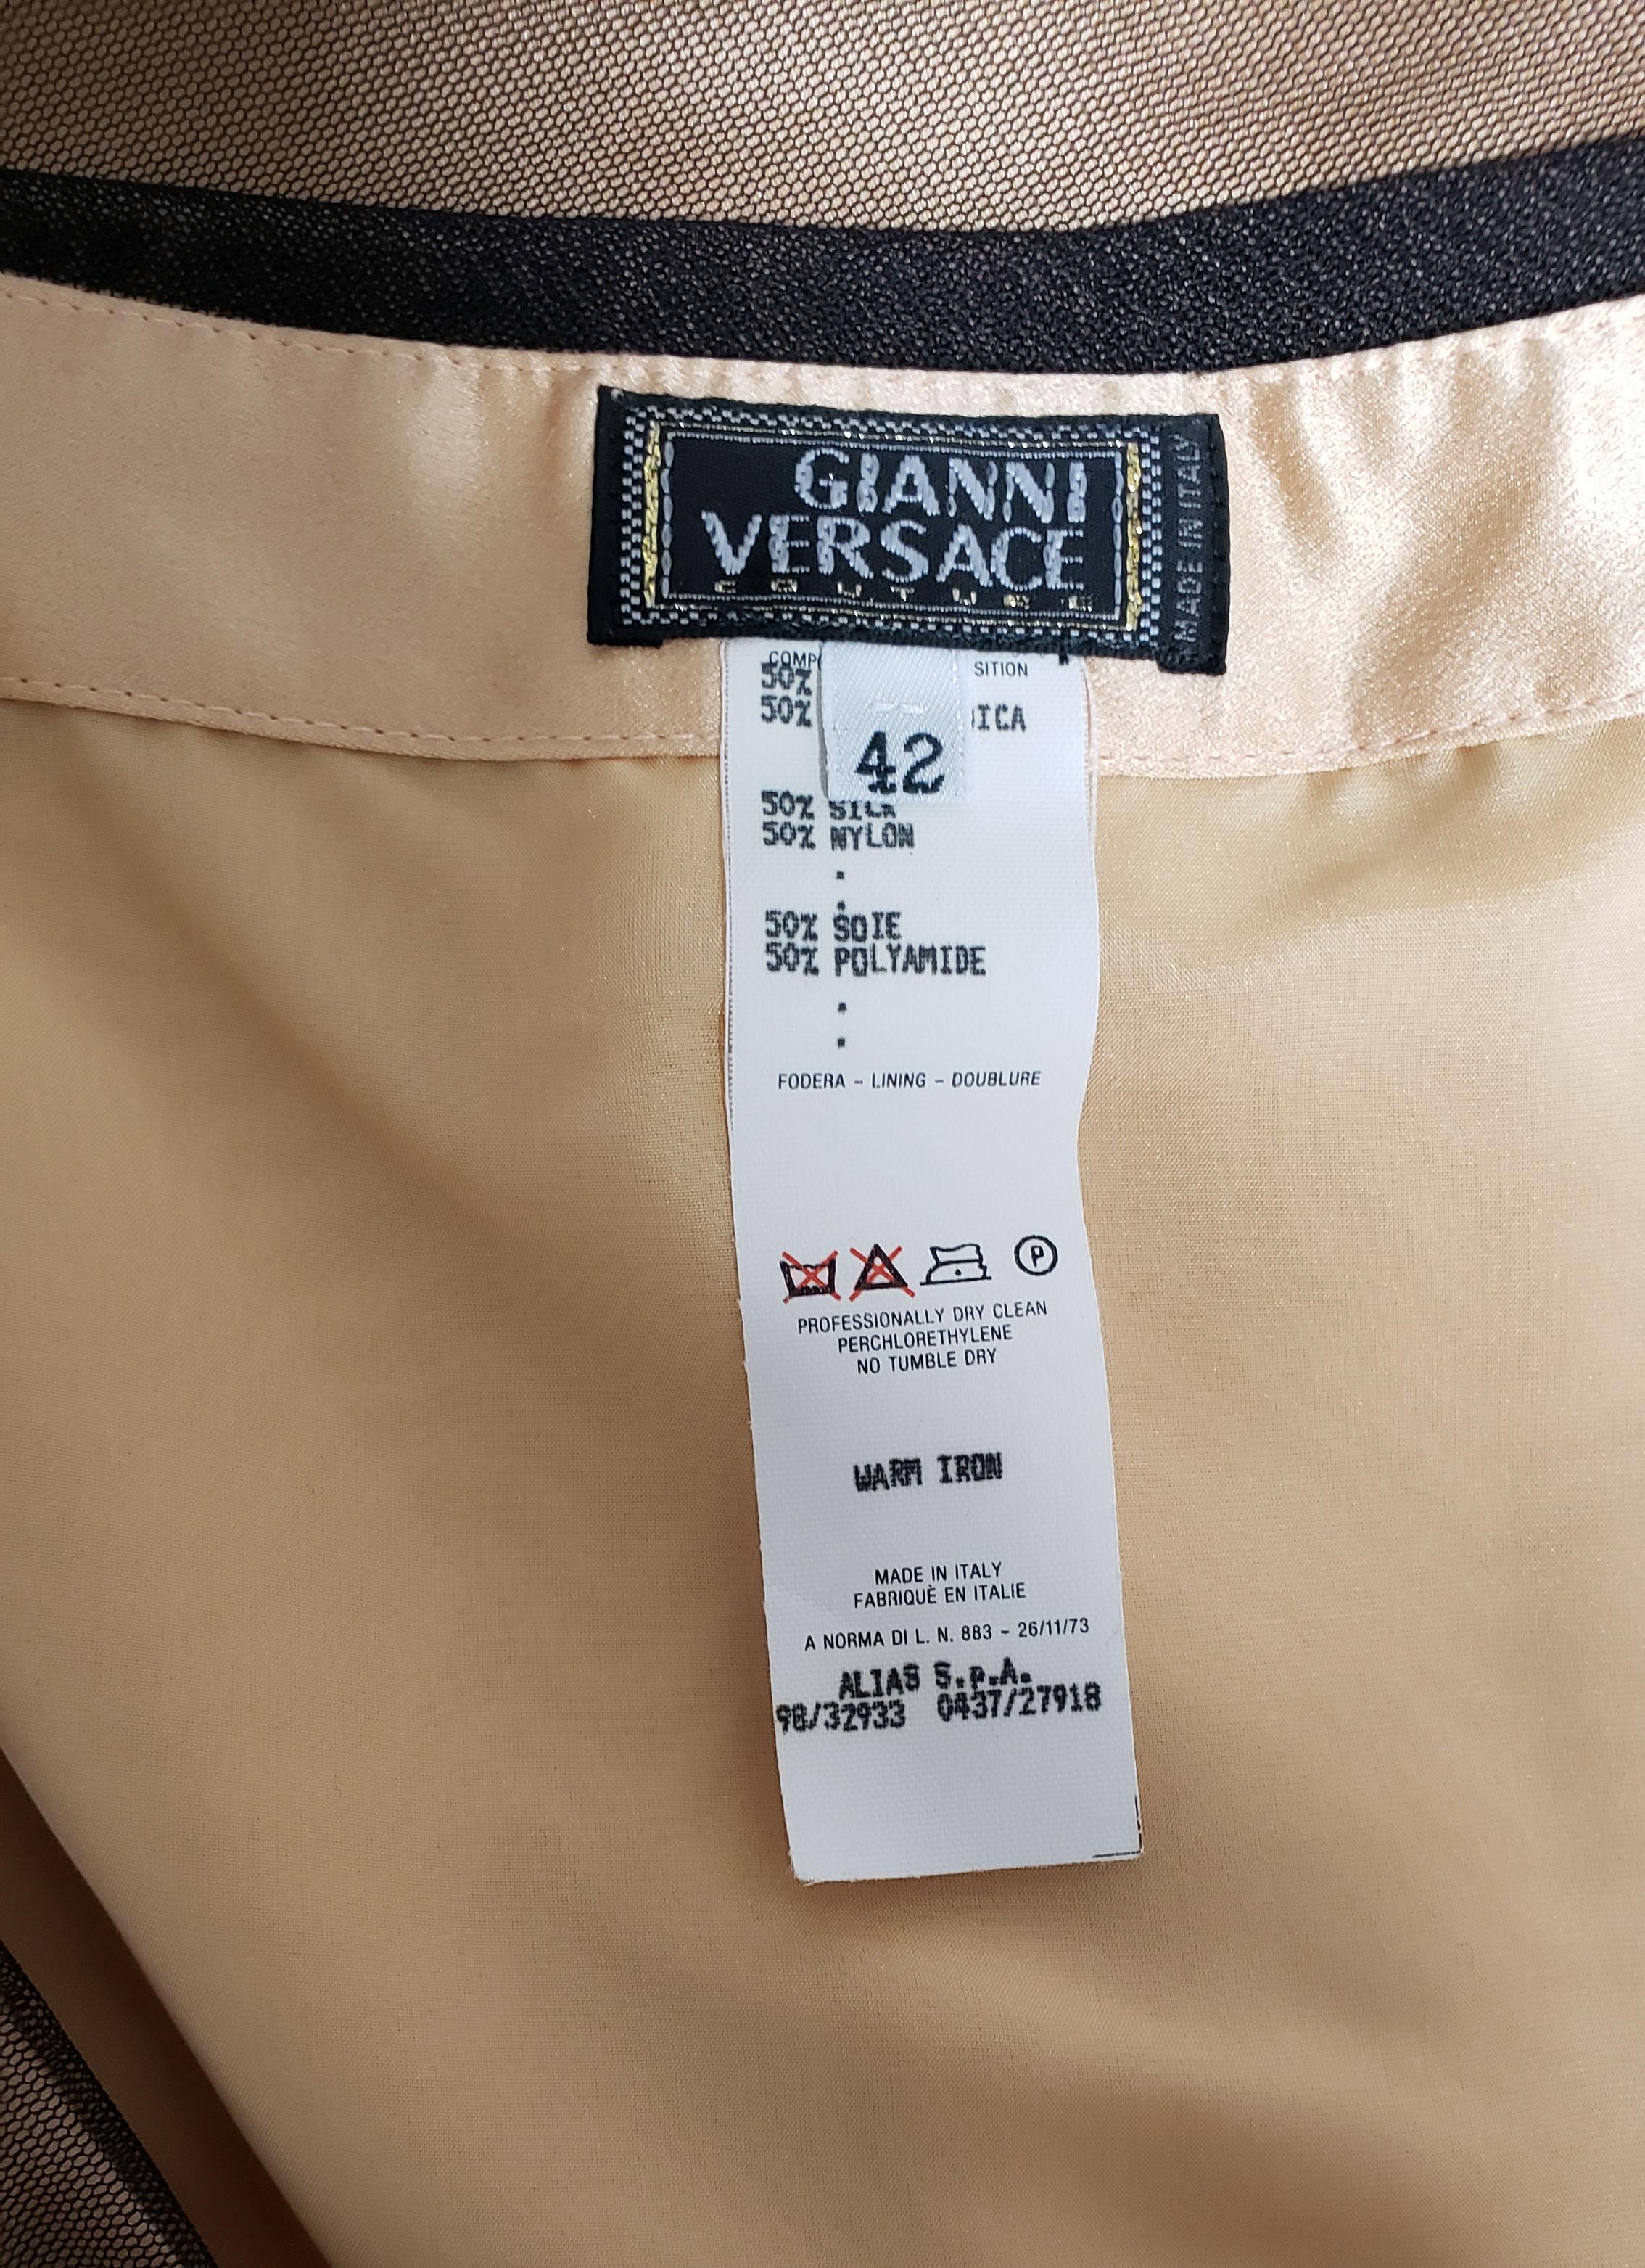 NEW VINTAGE GIANNI VERSACE BEIGE and BLACK TULLE MIDI SKIRT 42 - 6 For Sale 5